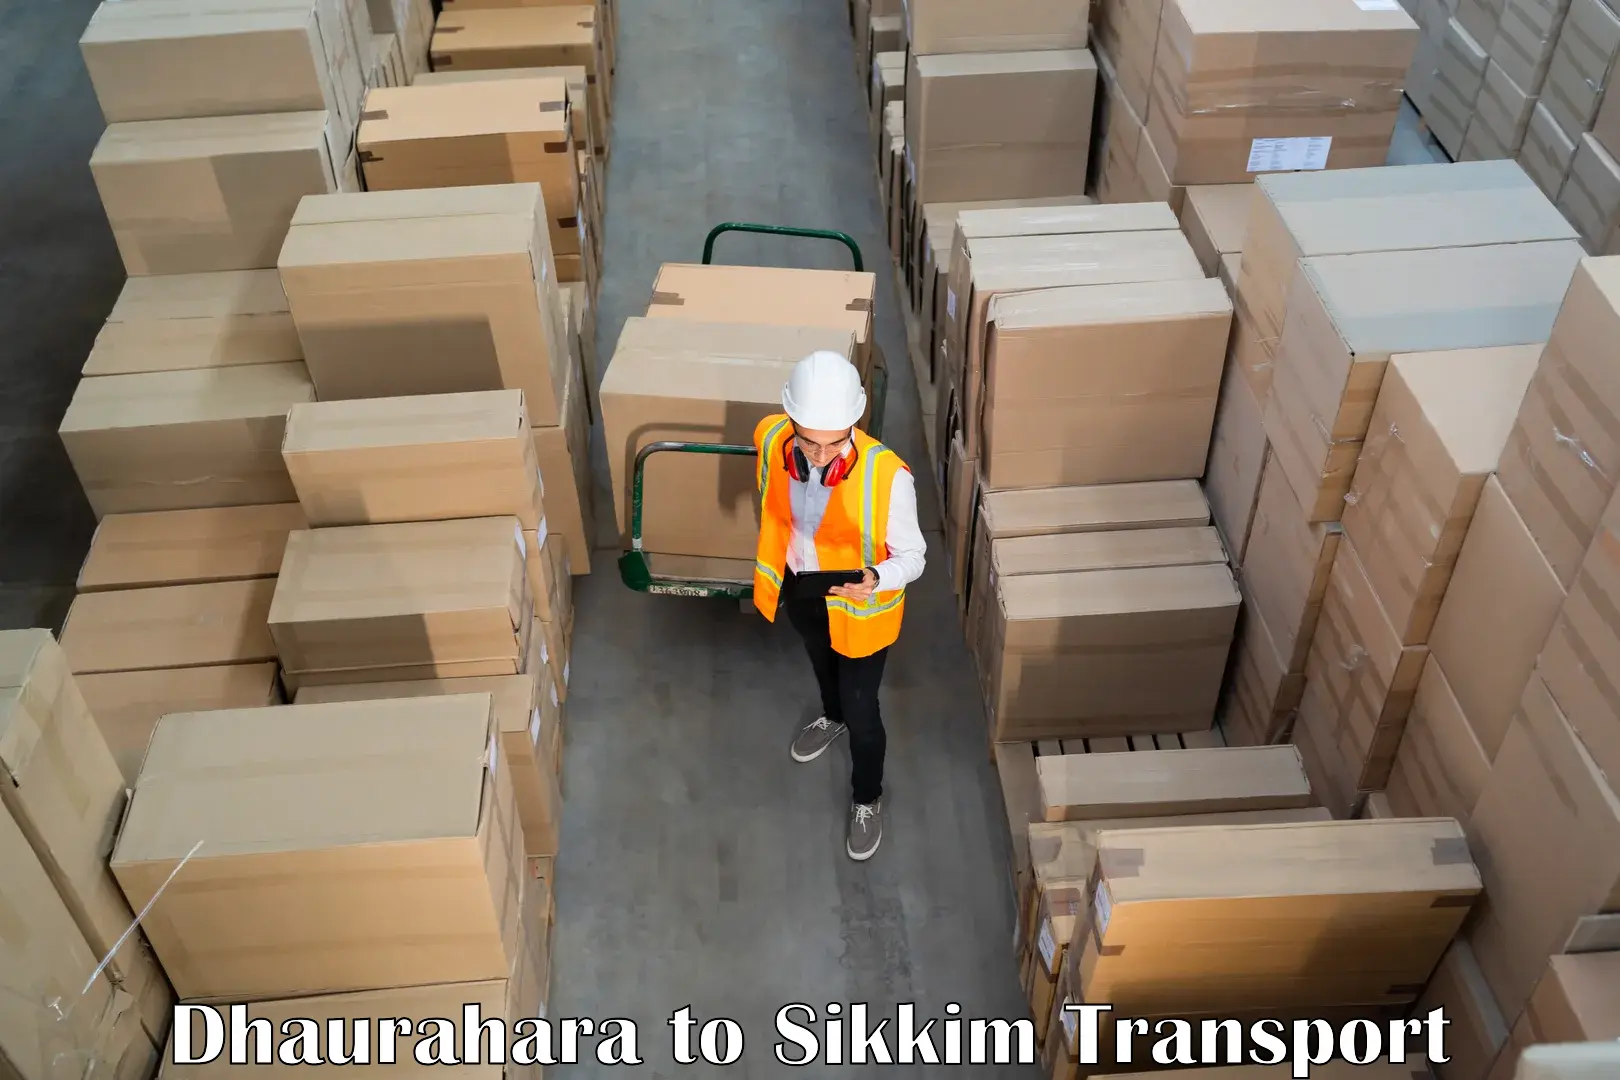 Part load transport service in India Dhaurahara to Sikkim